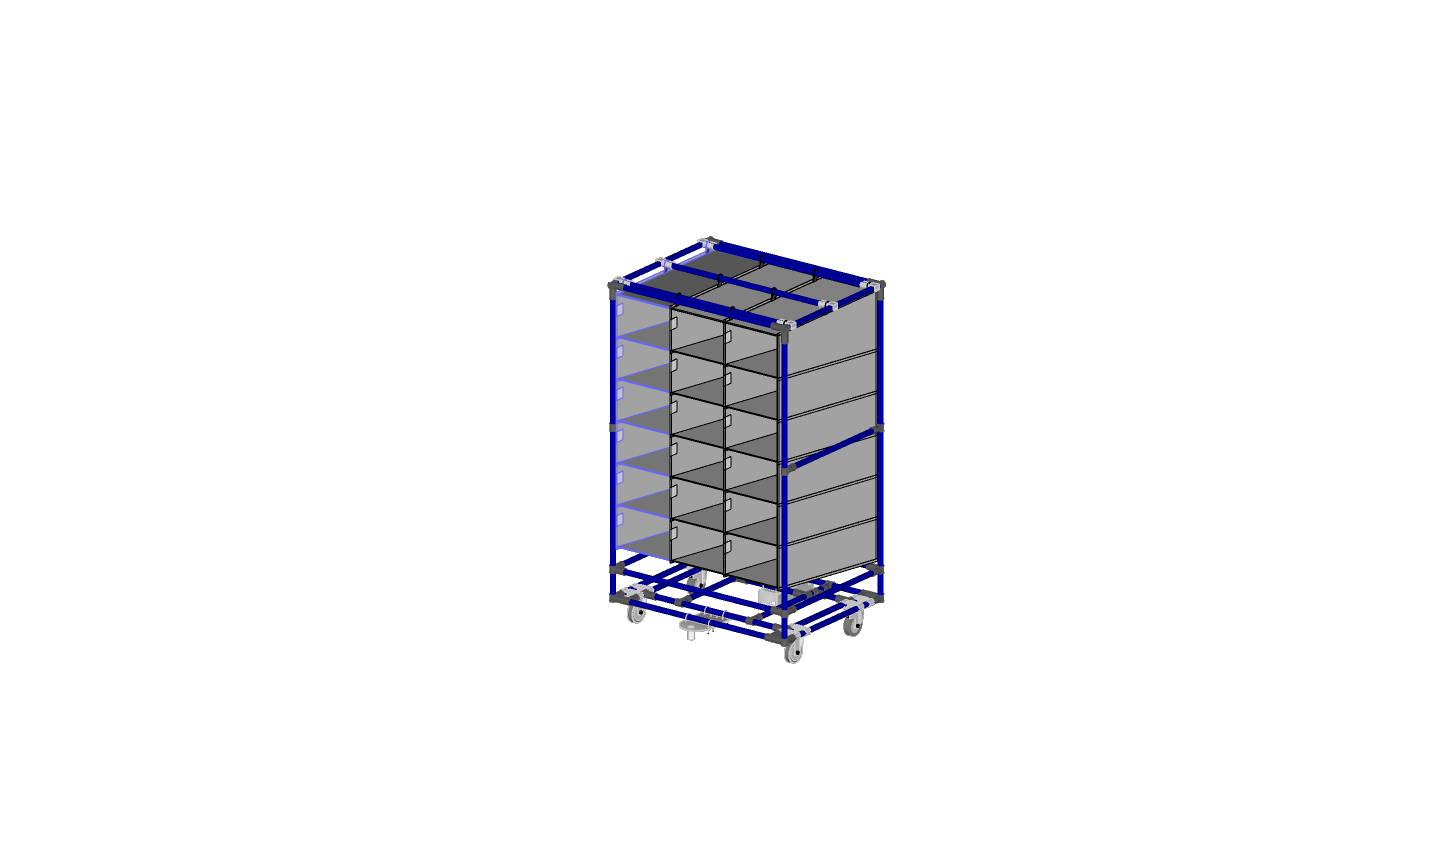 Carts for storage